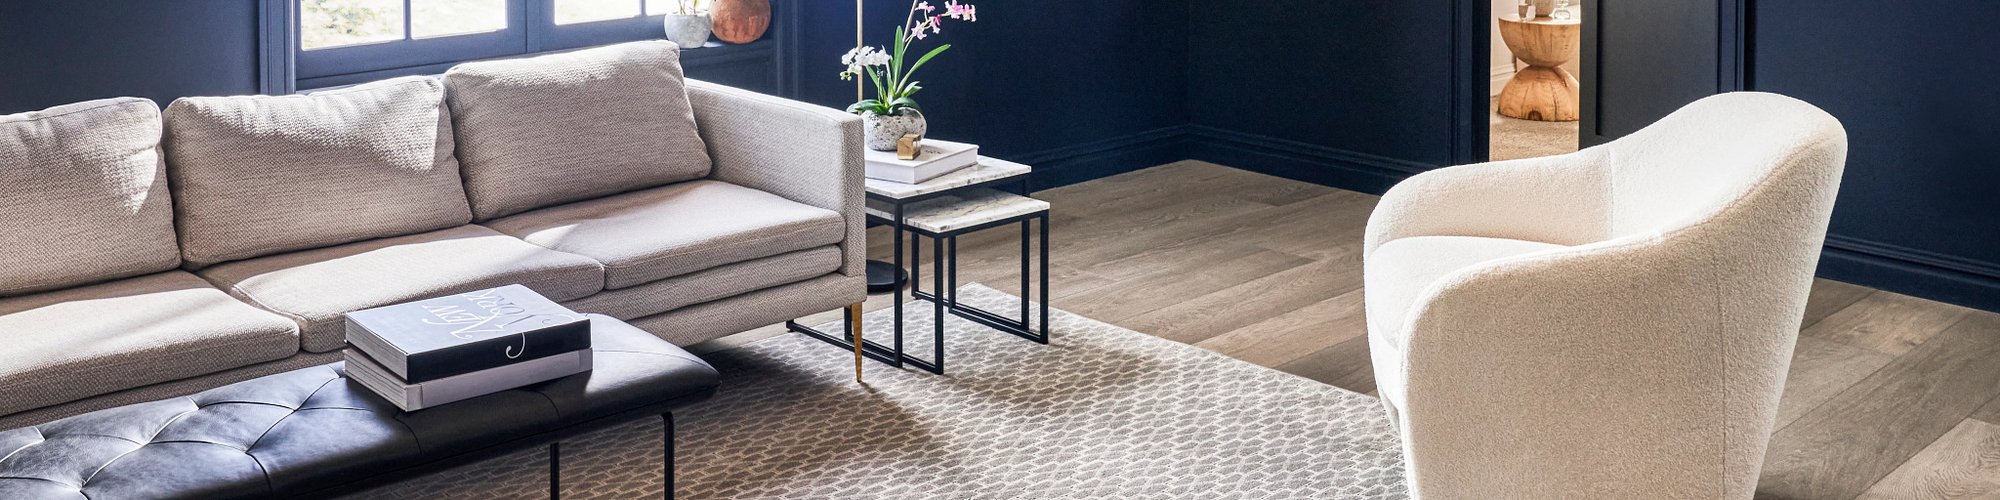 Benefits of Area Rugs